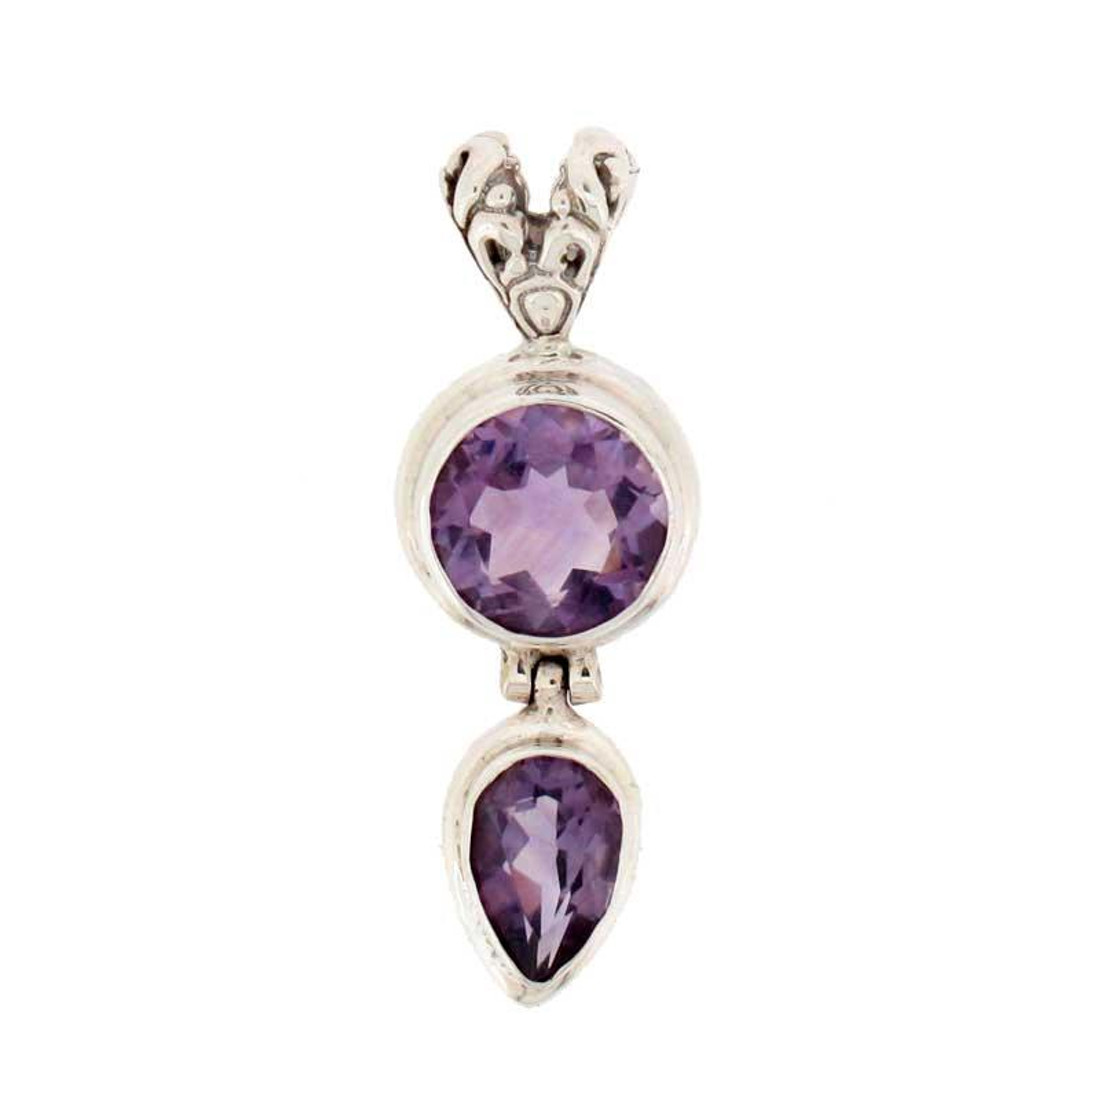 Faceted Amethyst sterling silver pendant. 